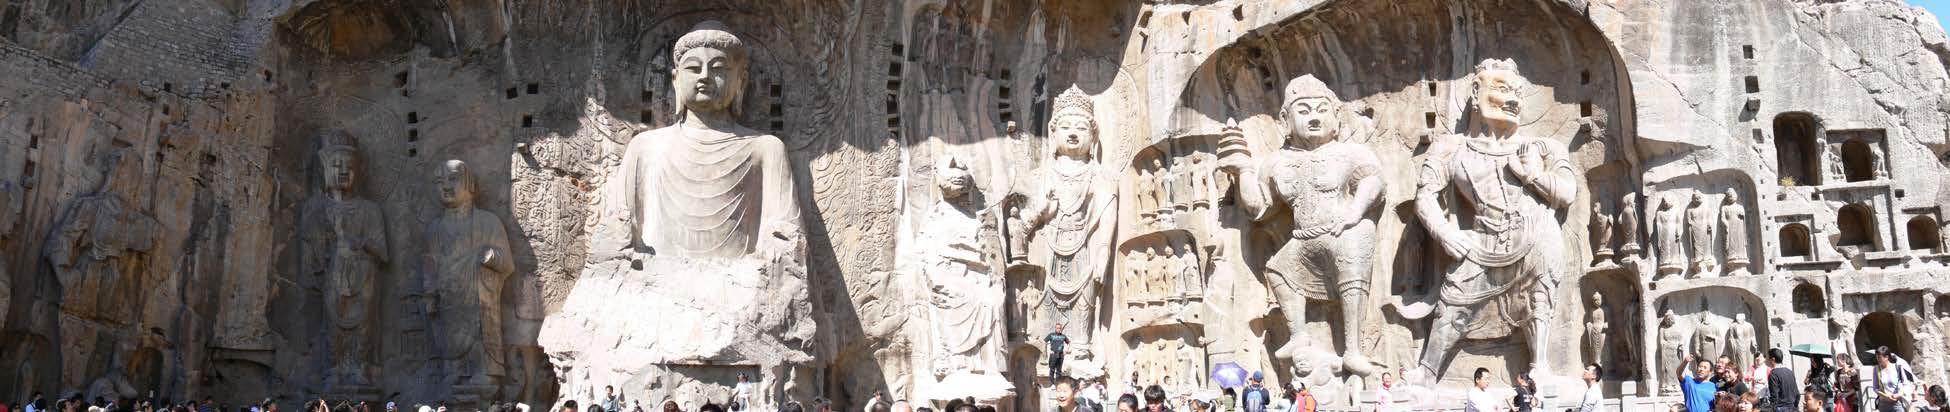 Giant Buddhas carved into stone.